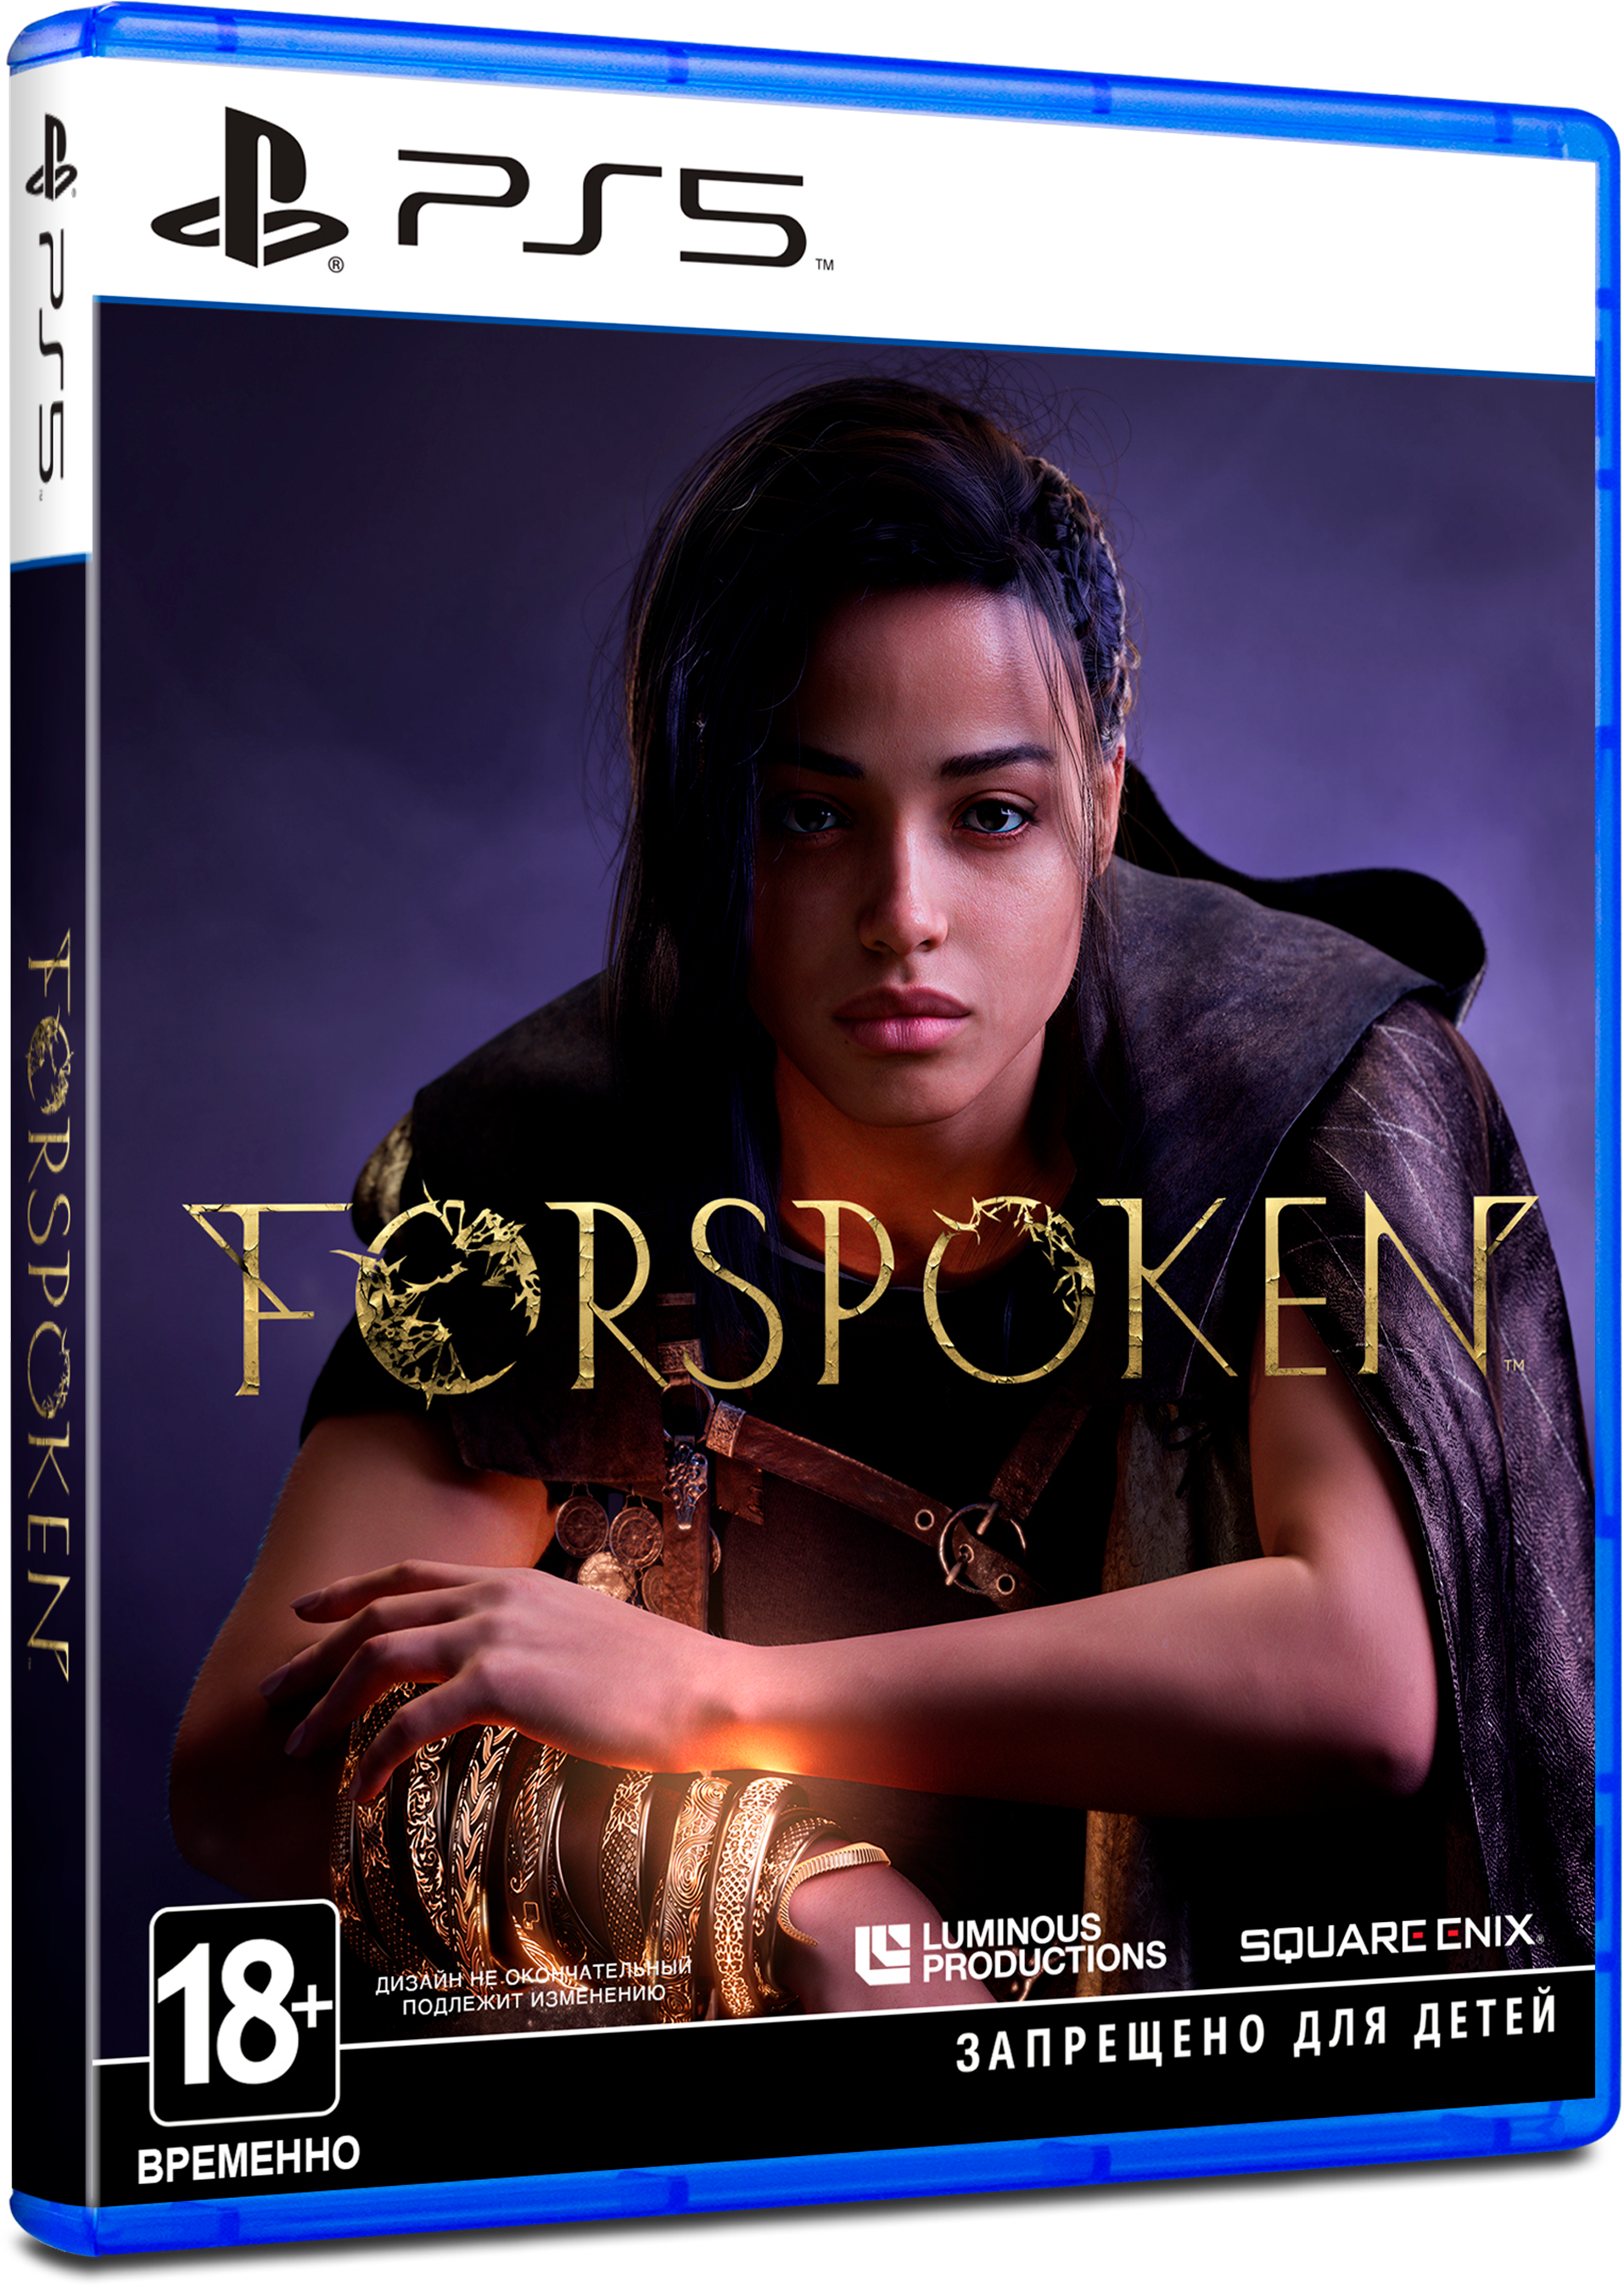 Forspoken ps5. Форспокен PS 5. Uncharted PLAYSTATION 5. Forspoken ps5 отзывы. PLAYSTATION 5 С картинки Uncharted.